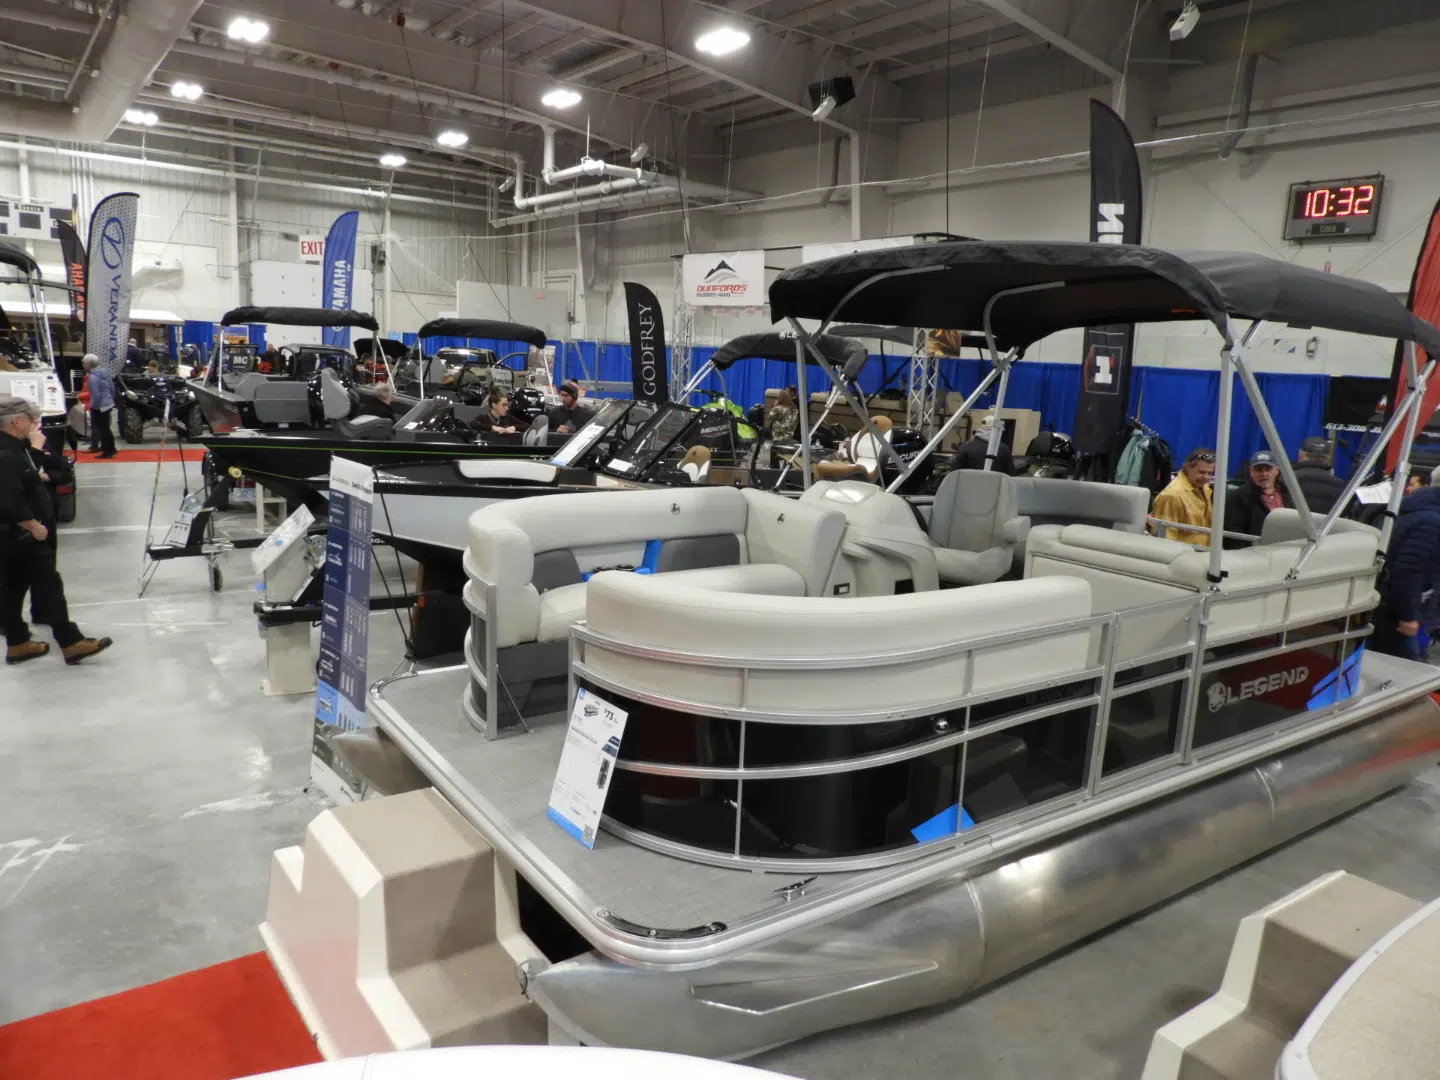 Record numbers at Sportsman, Boat and RV show